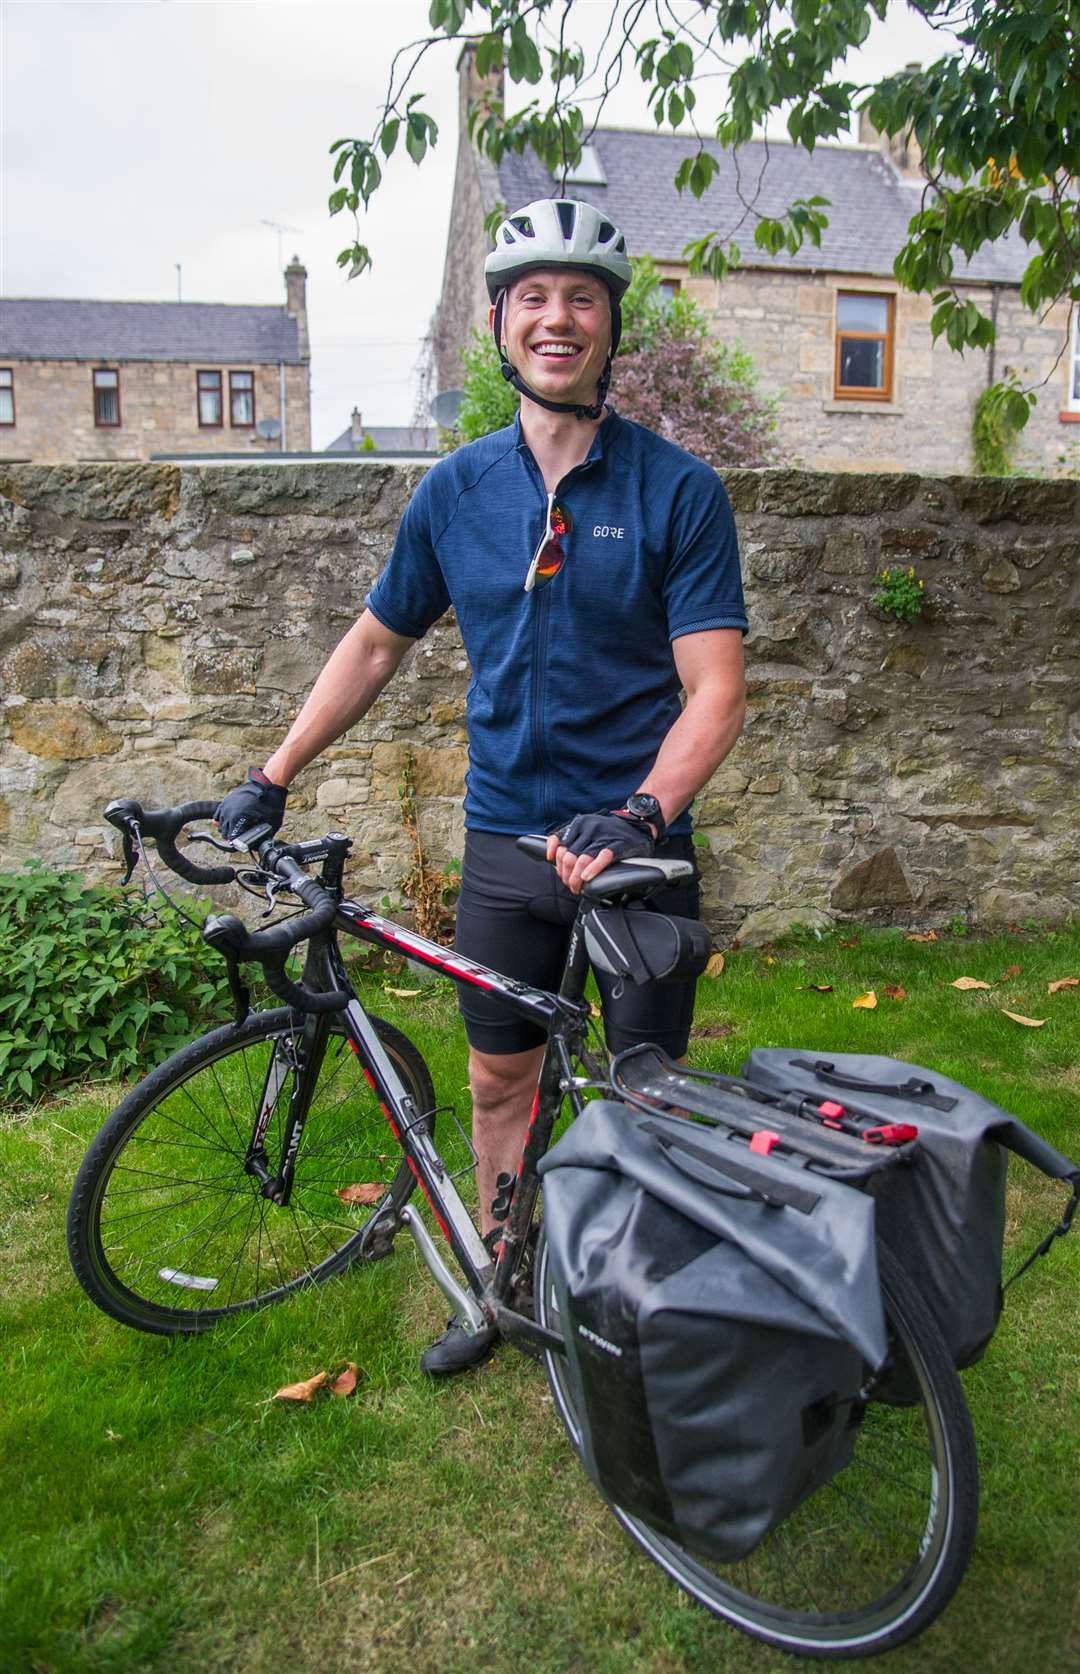 Neil Miller cycled from Land's End to John O'Groats to raise fund for Cancer research after being inspired by a friend's battle with cancer. Picture: Becky Saunderson